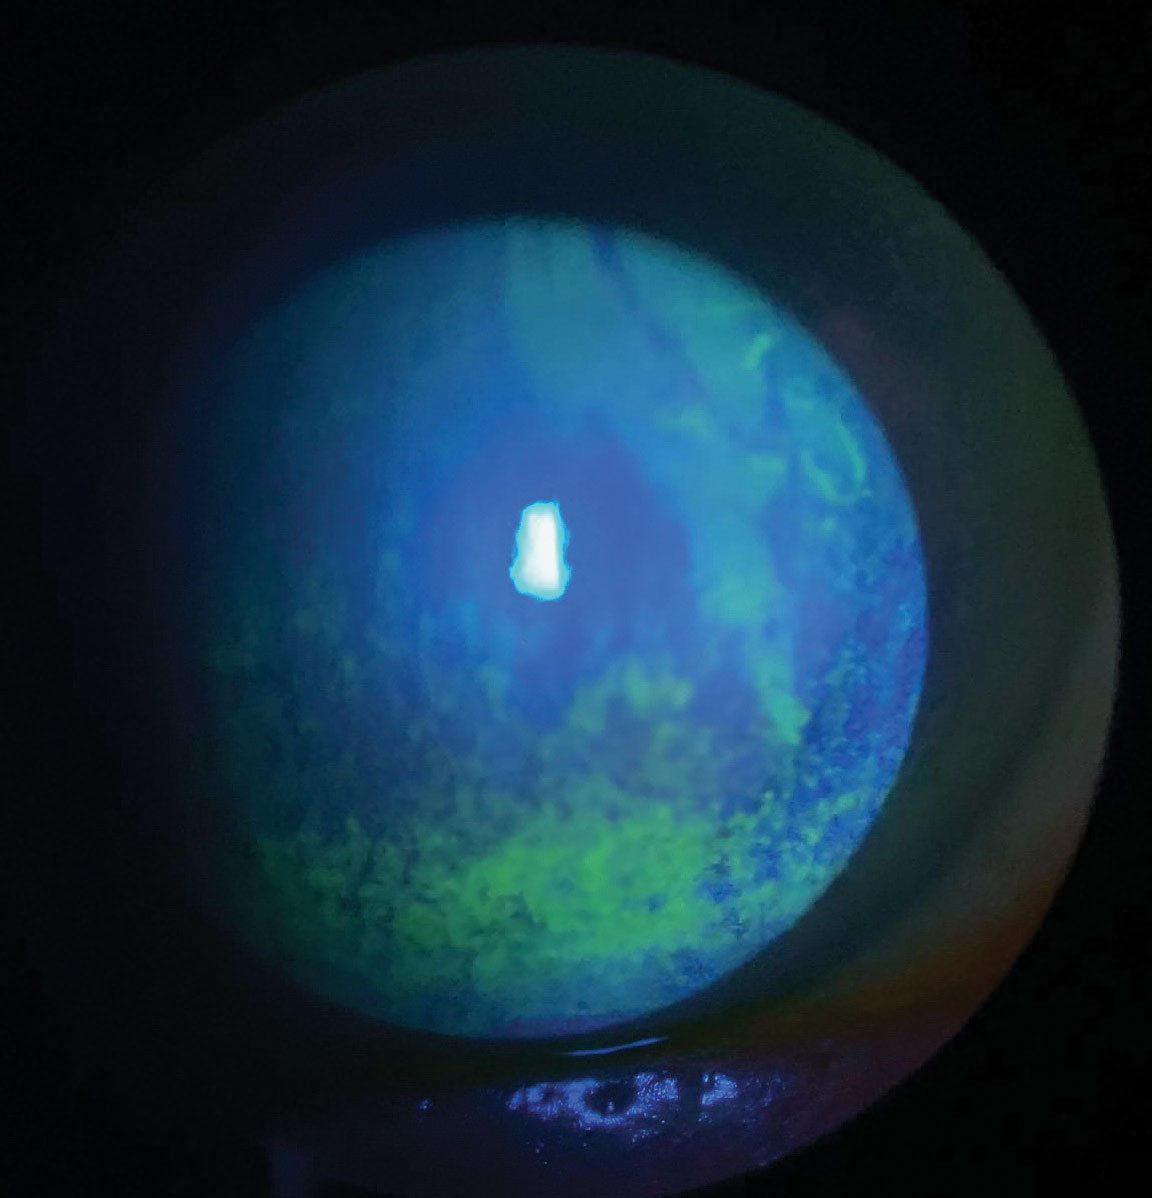 This patient with dry eye has extensive punctate epithelial keratitis and decreased tear break-up time. Treatment requires consideration of patient symptoms, underlying contributory systemic conditions and medication use. 